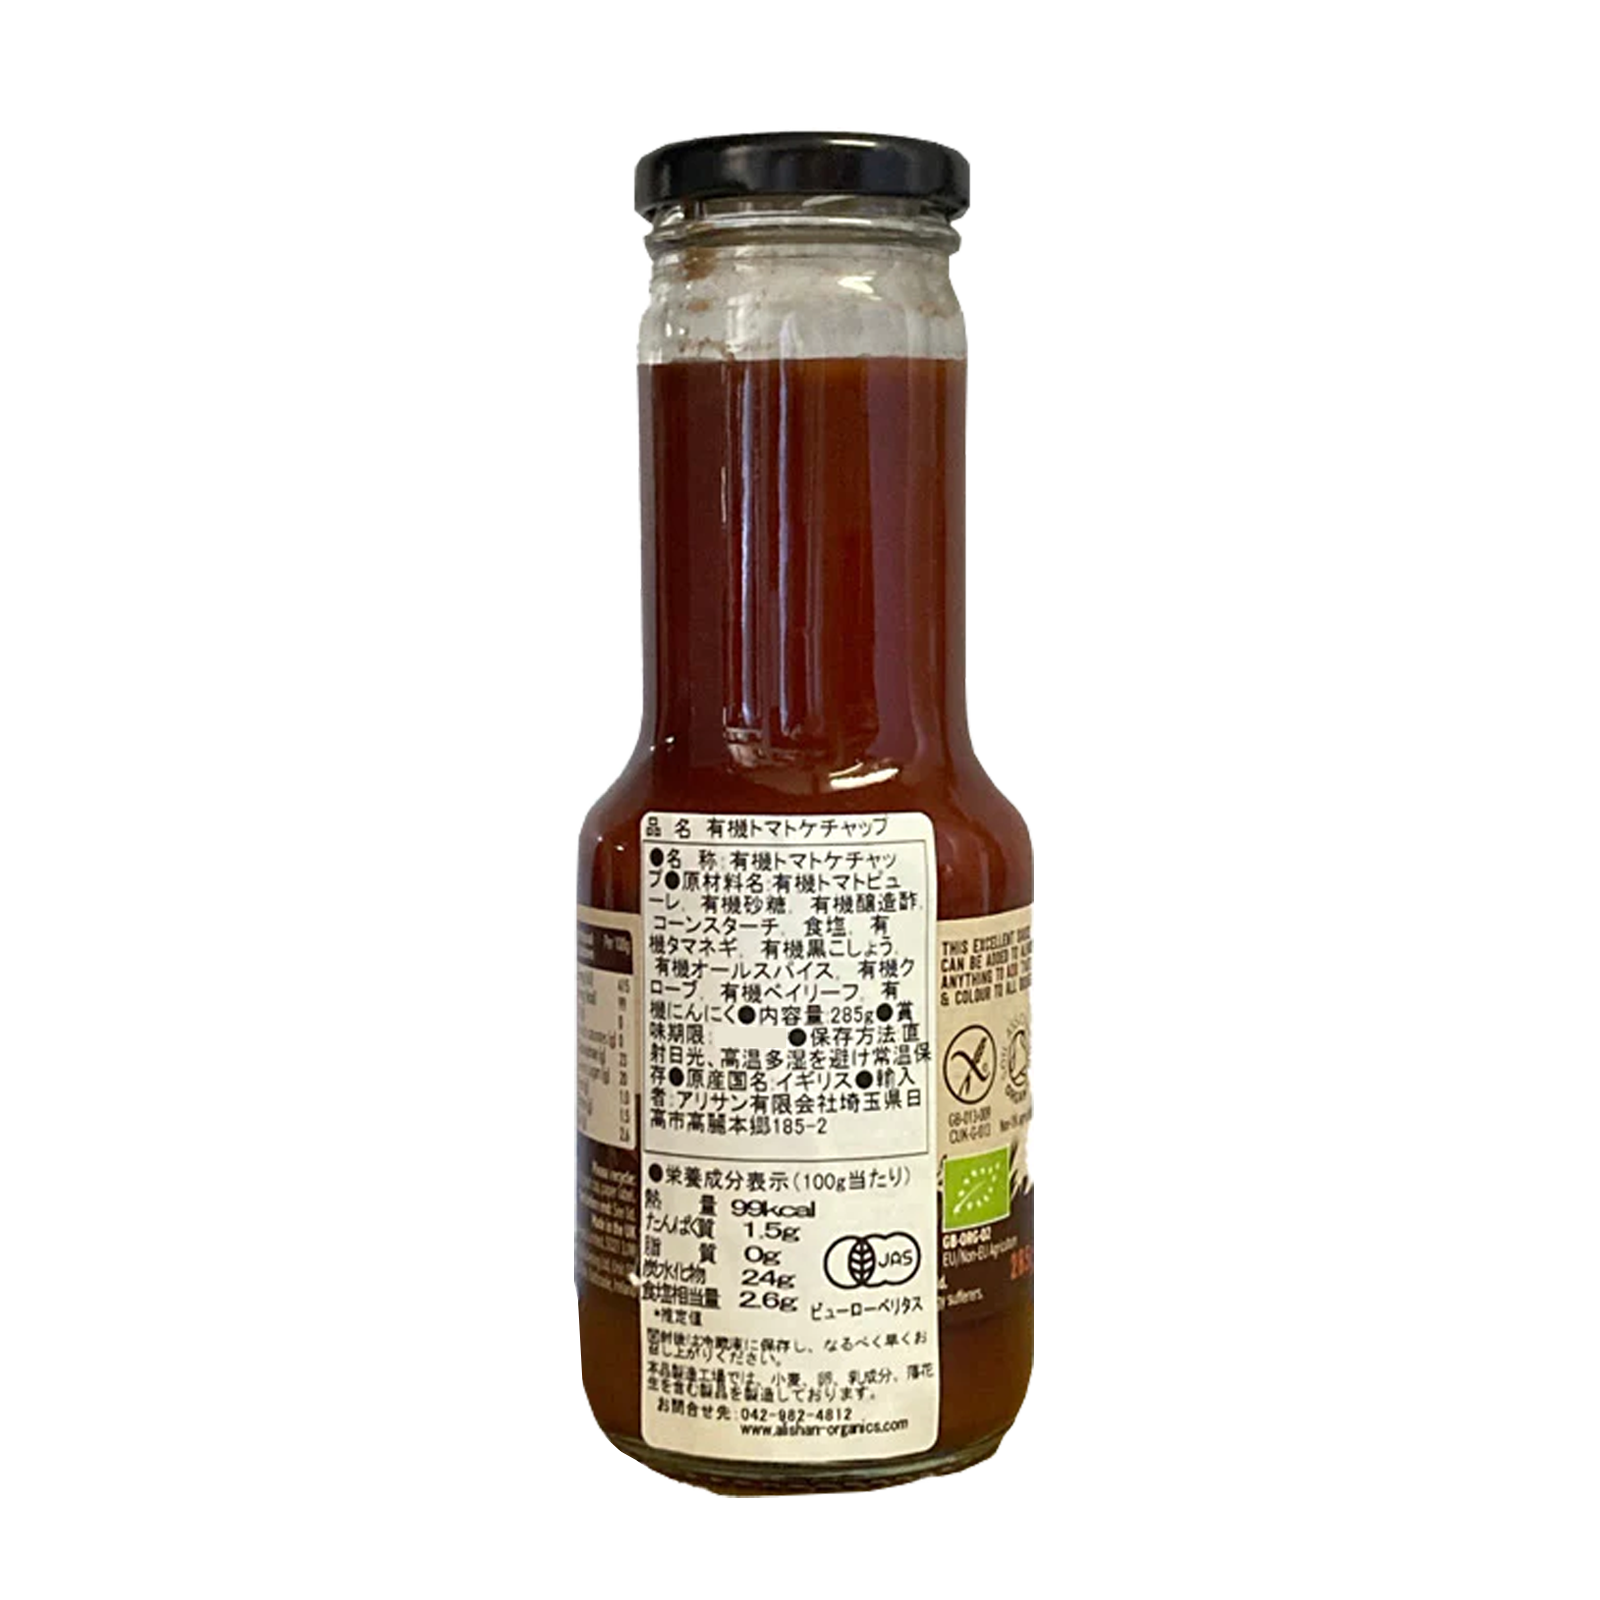 Certified Organic Additive-Free Tomato Ketchup from the United Kingdom (285g) - Horizon Farms